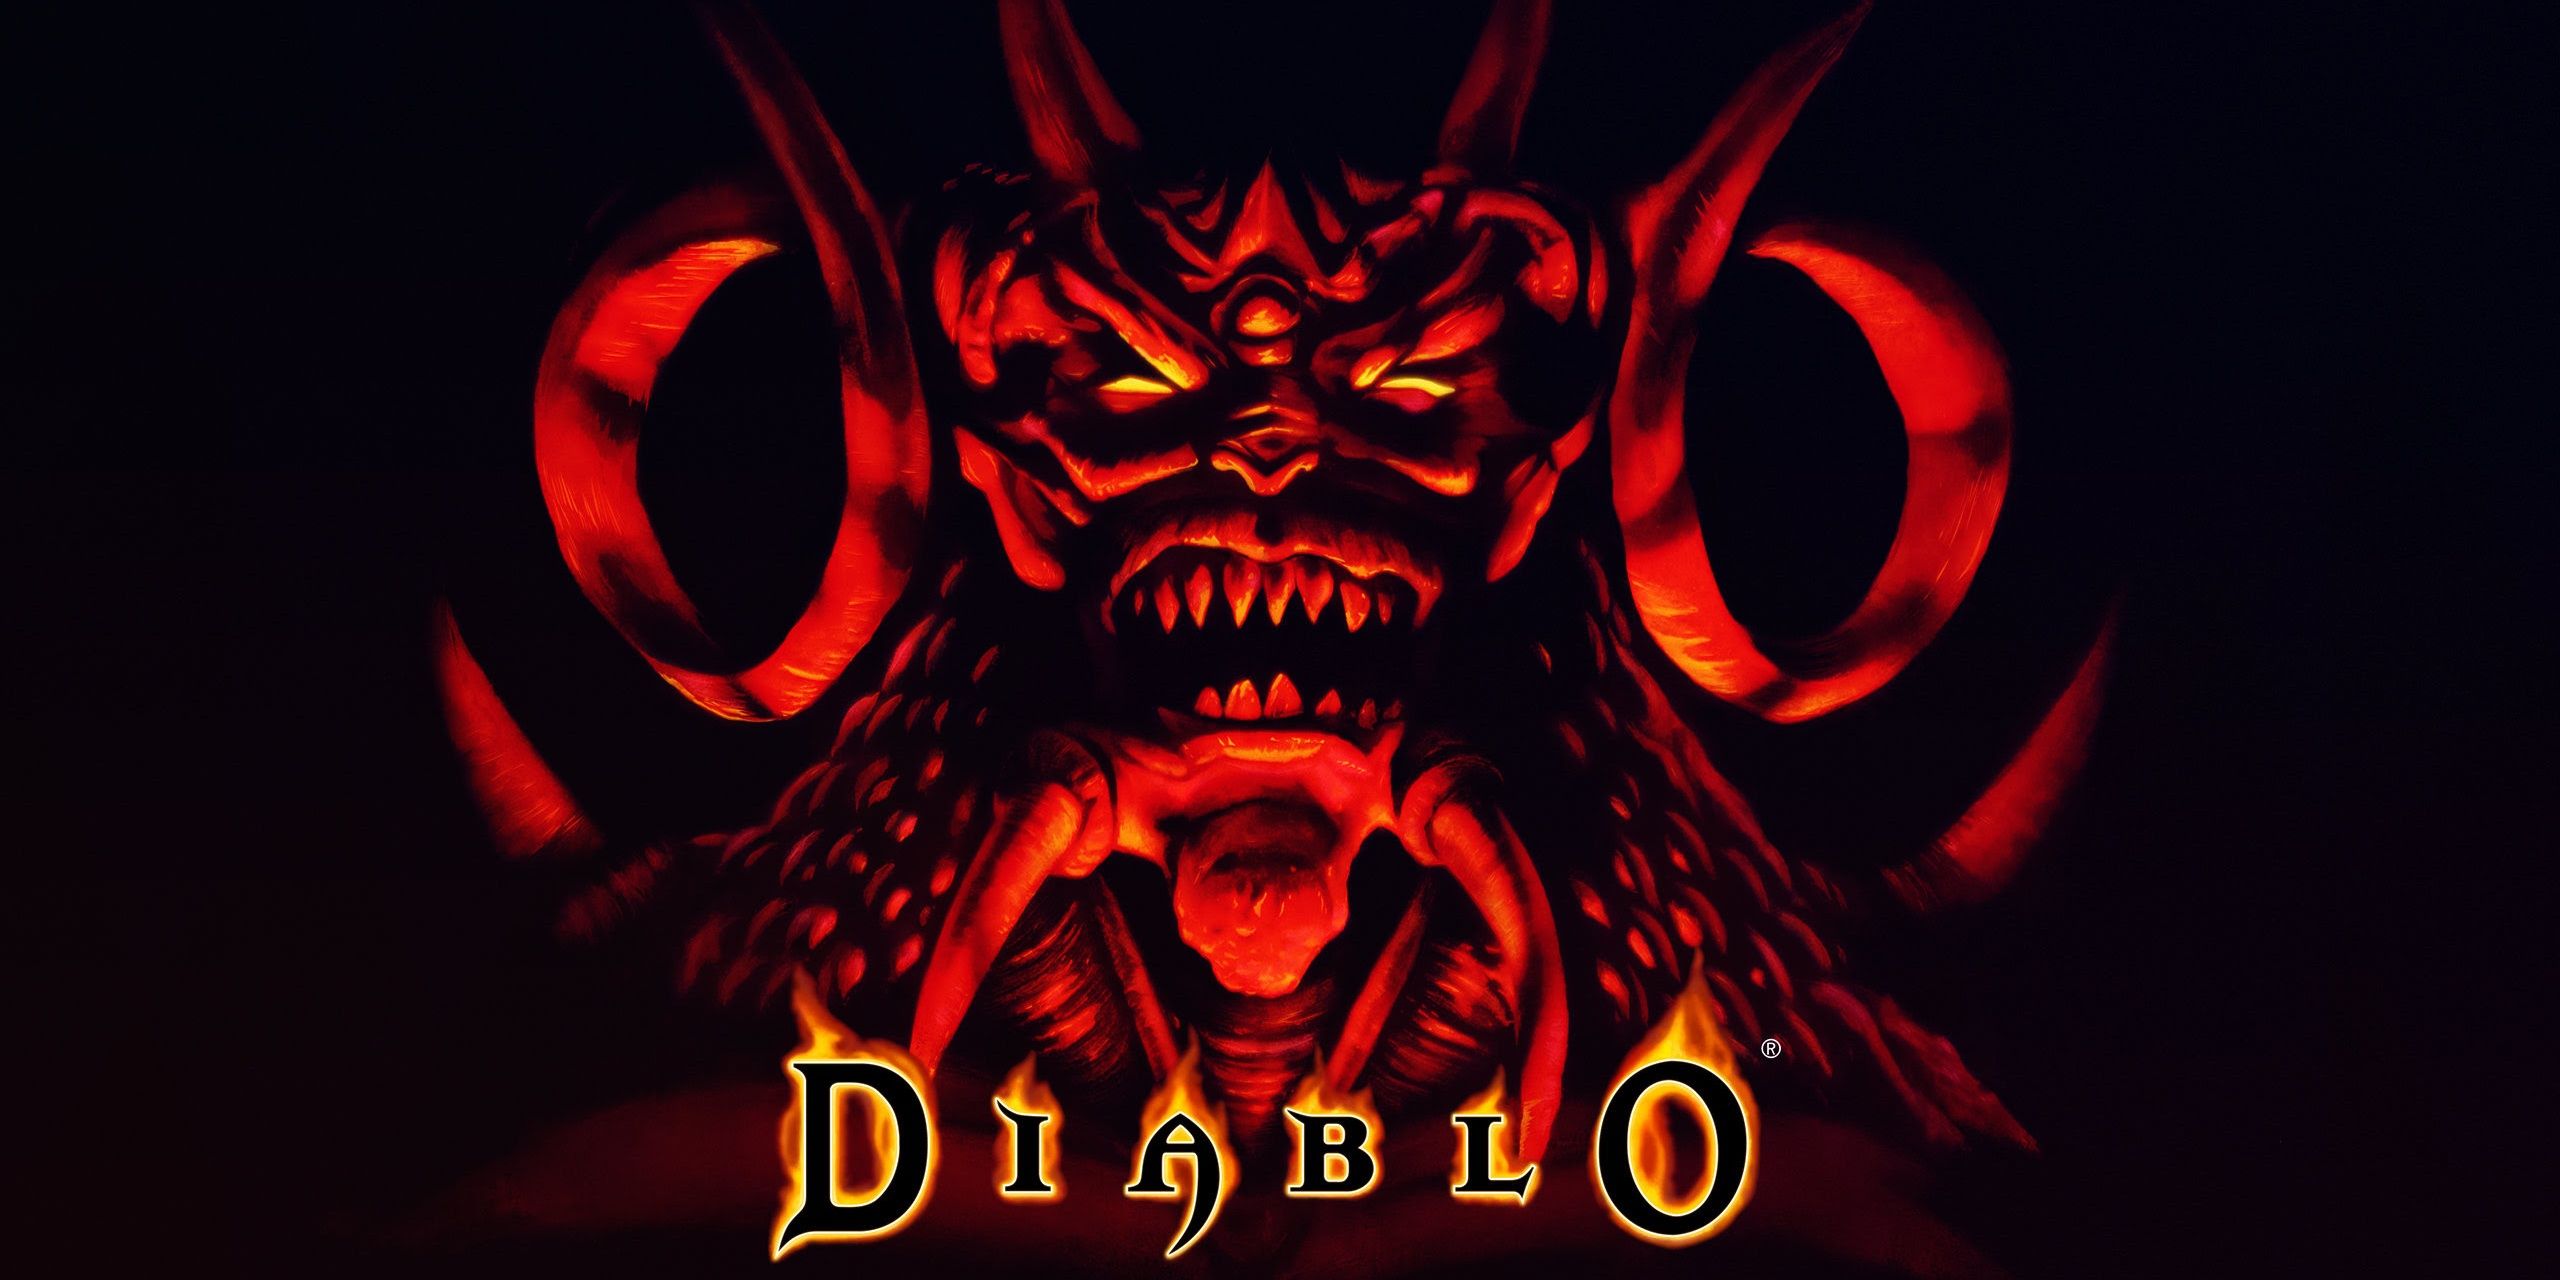 The Diablo logo with a red demon in the background